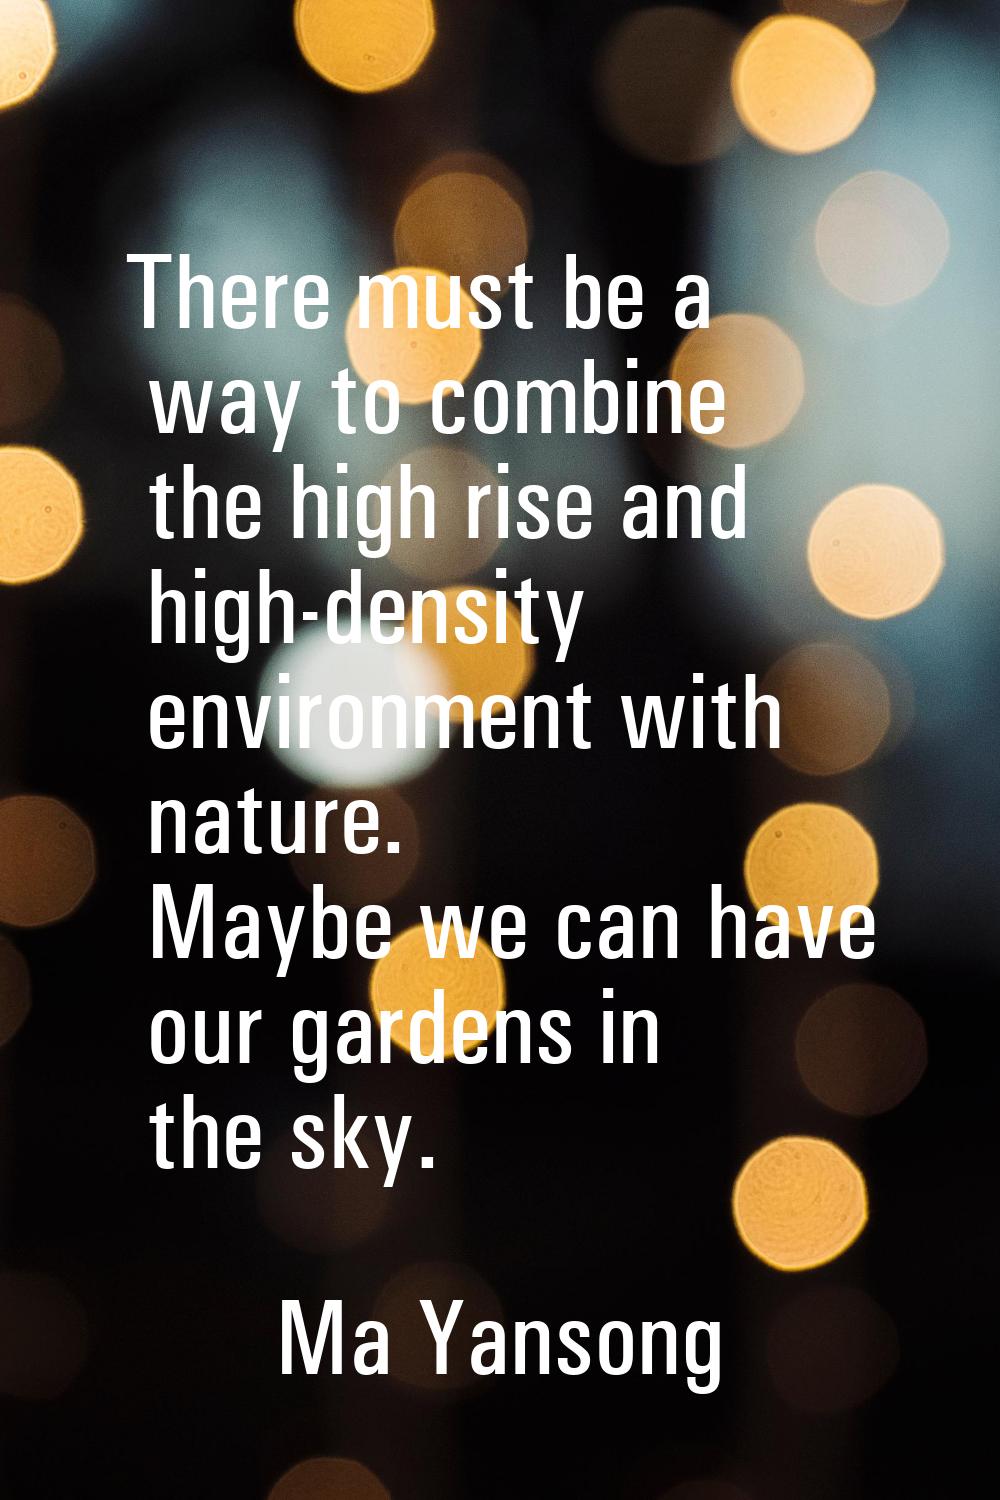 There must be a way to combine the high rise and high-density environment with nature. Maybe we can